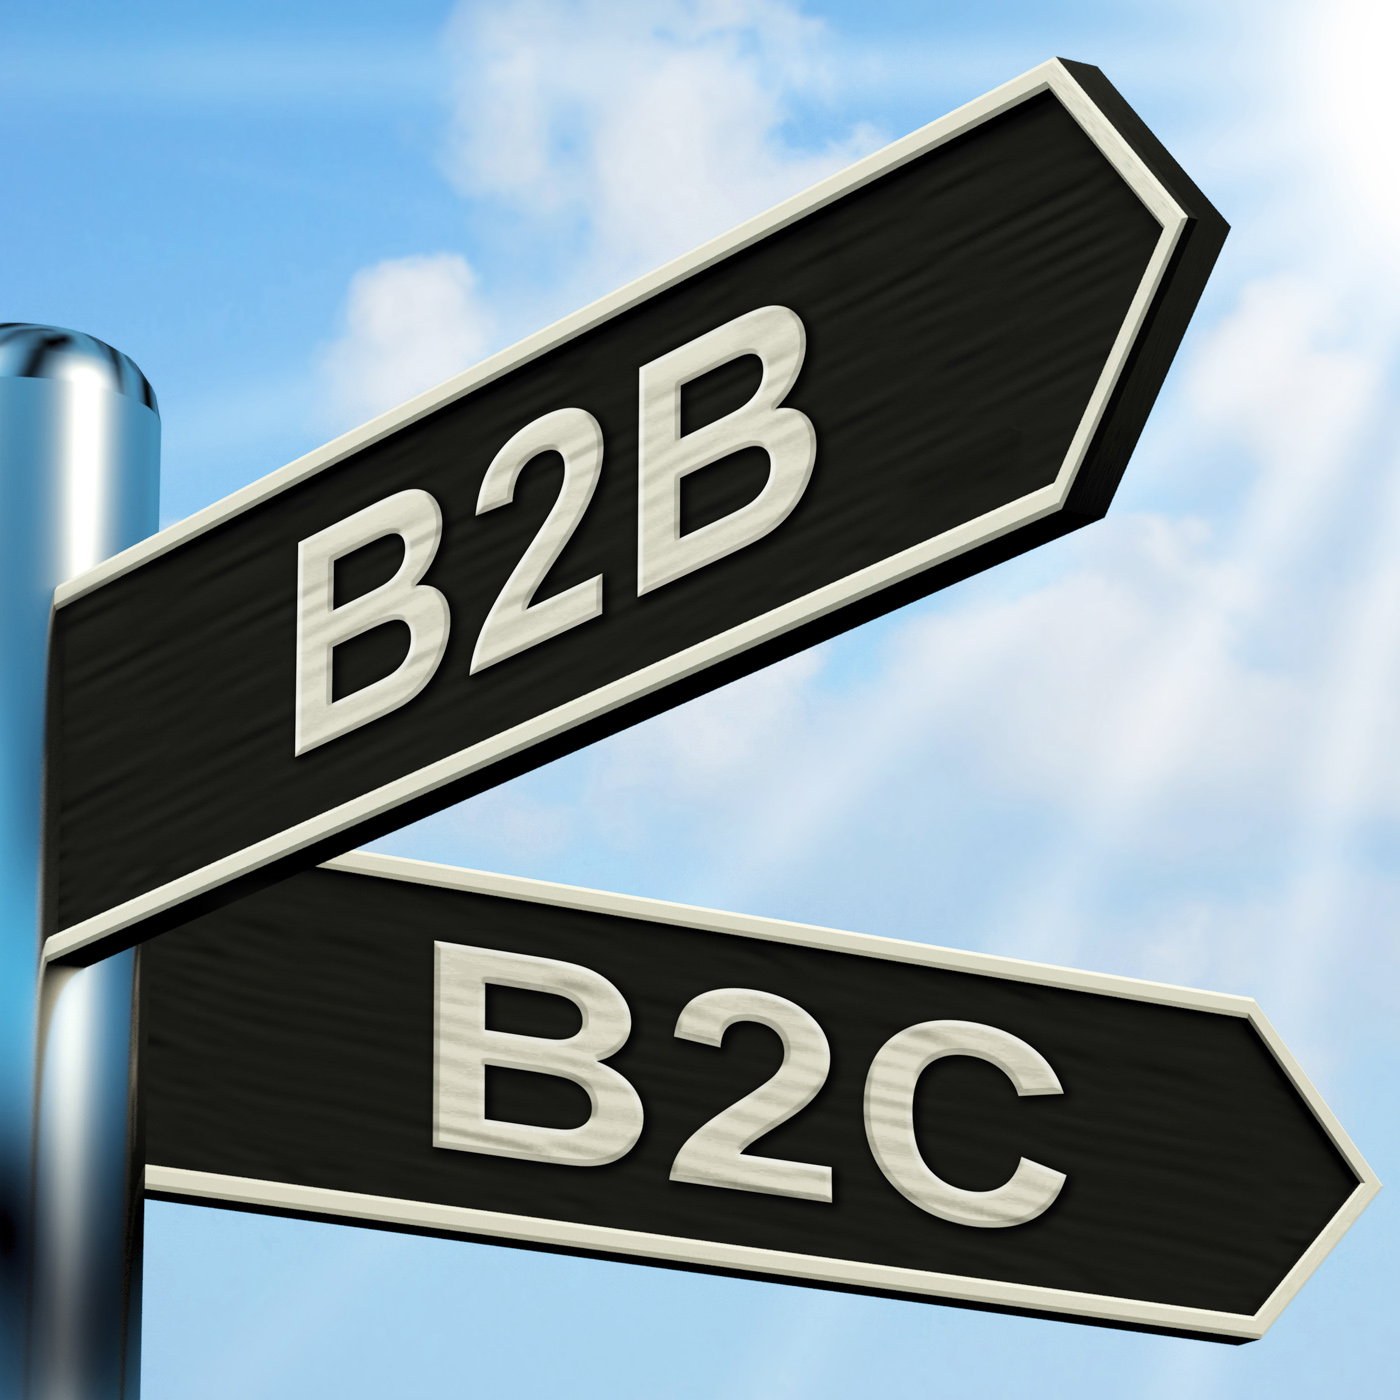 B2b b2c signpost means business partnership and relationship with cons photo